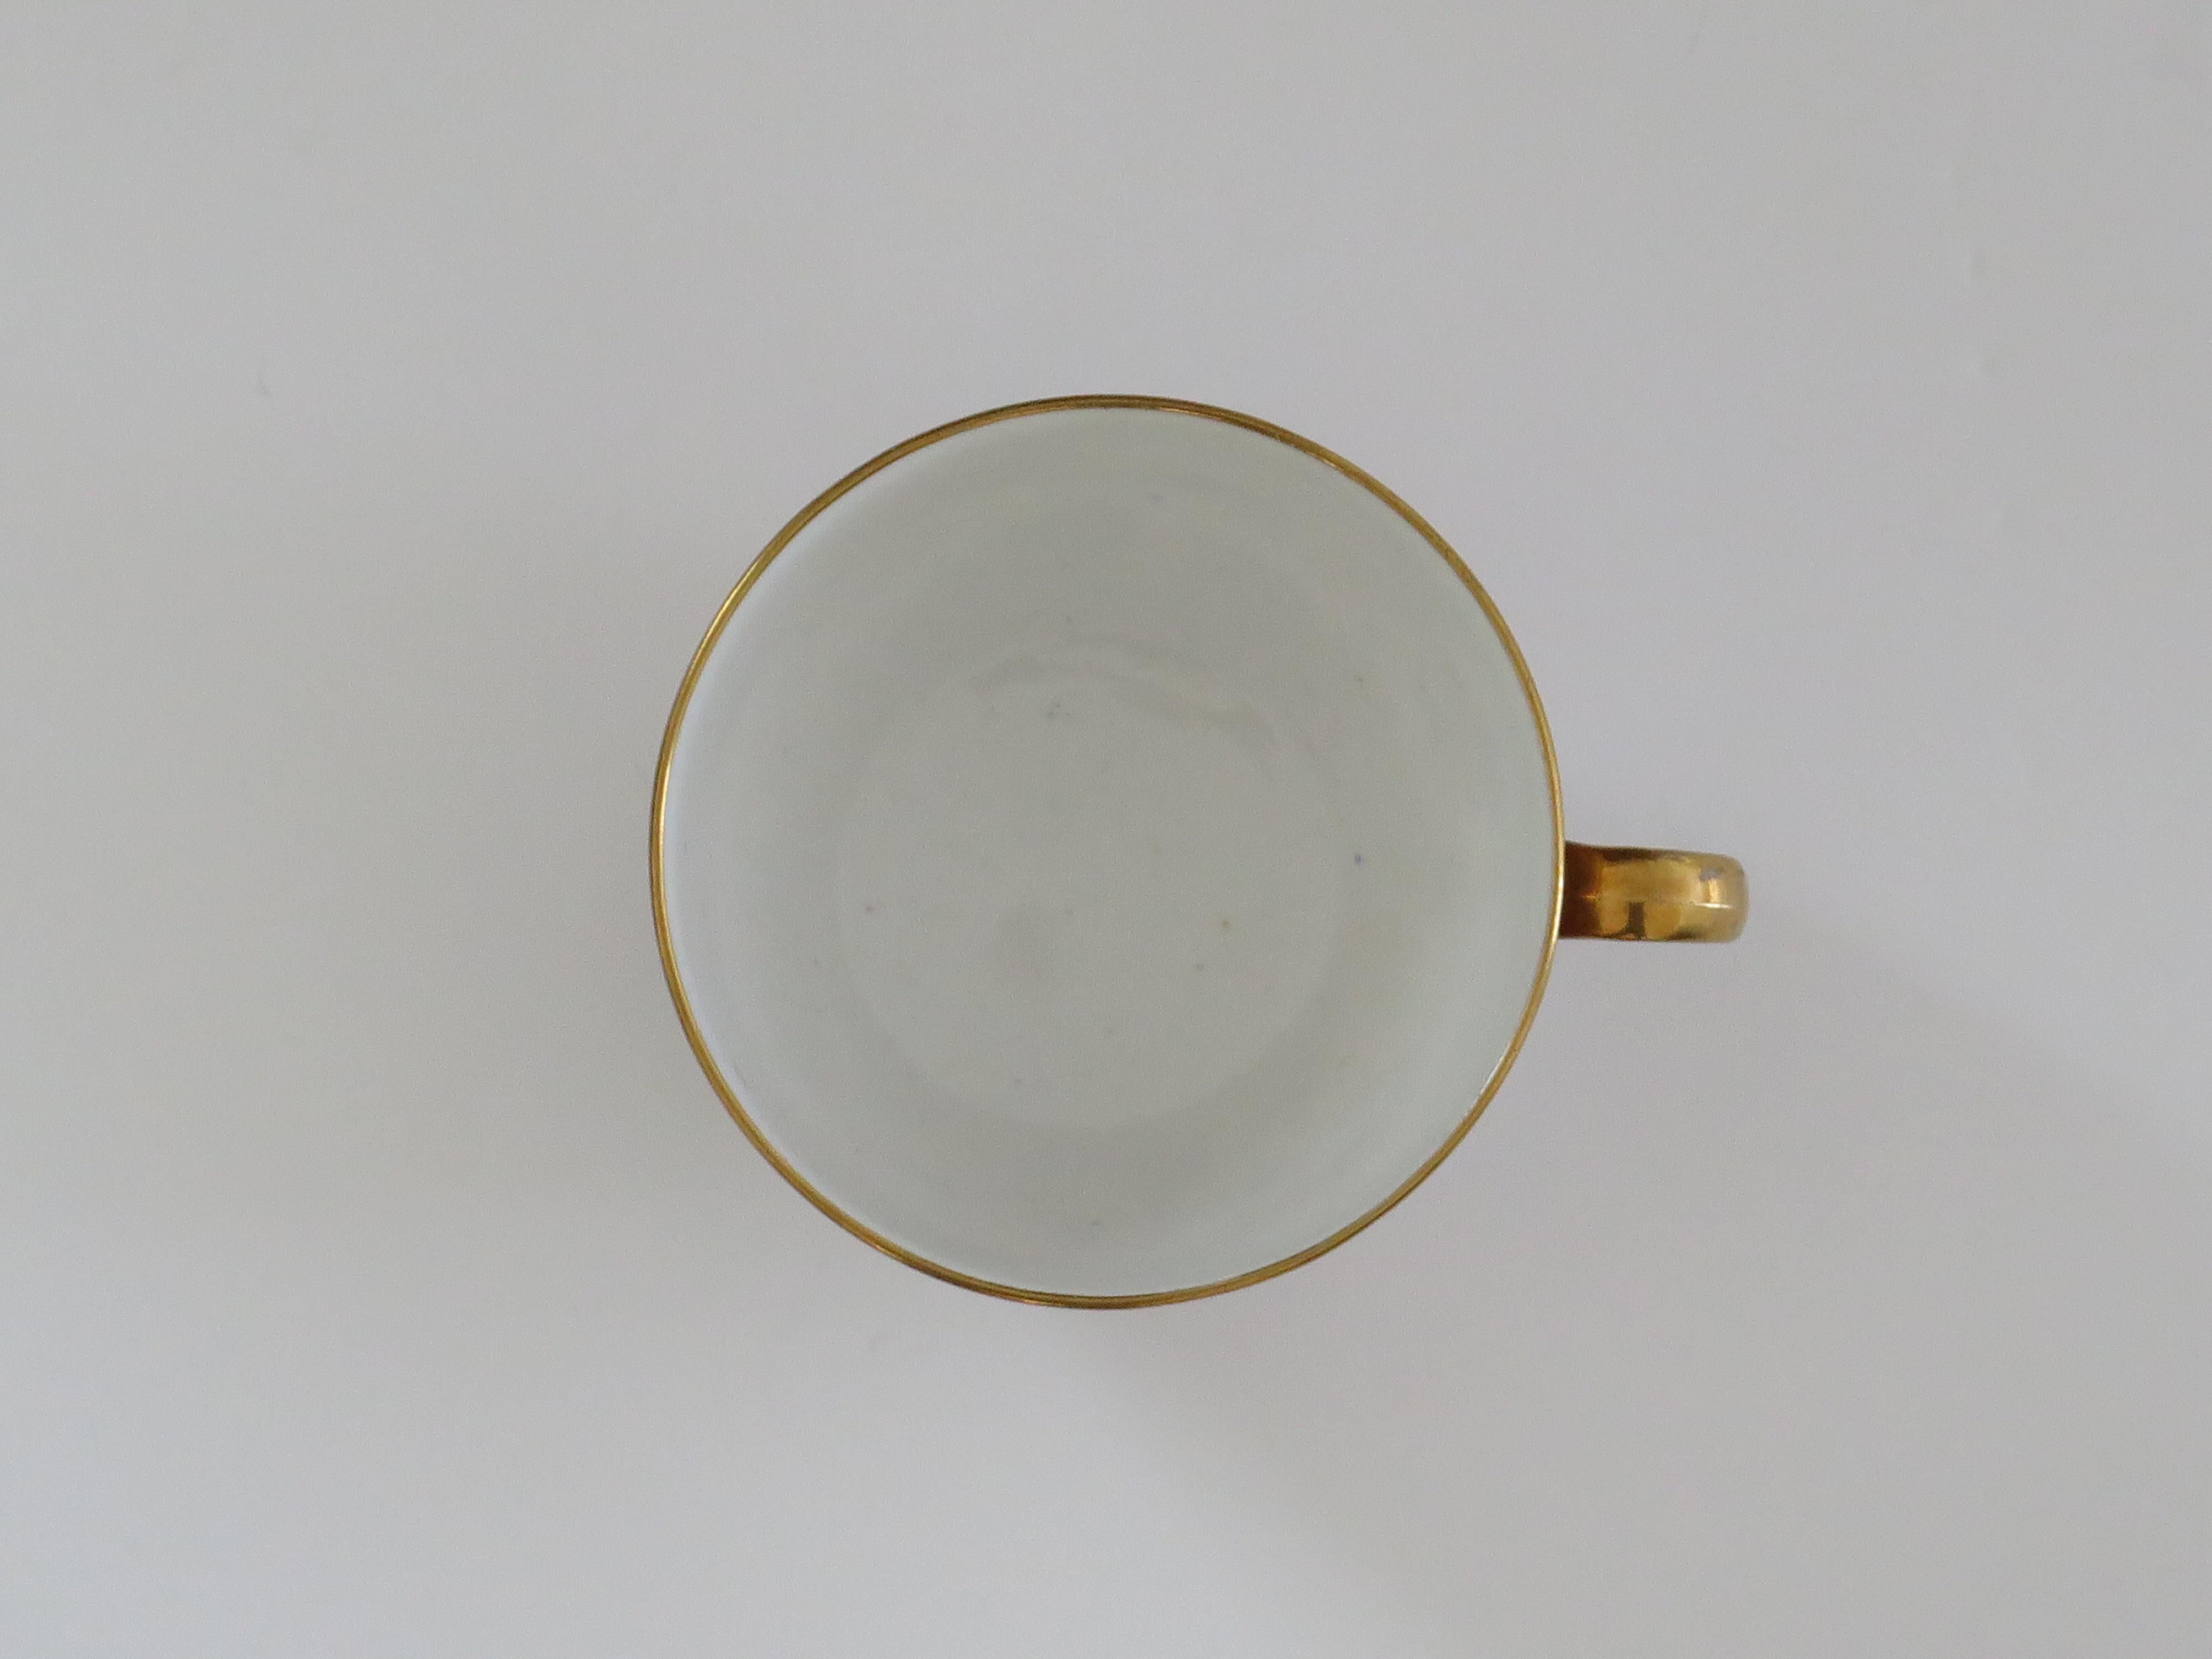 Spode Porcelain Tea Cup in Hand Painted & Gilded Pattern 967, circa 1810 For Sale 5